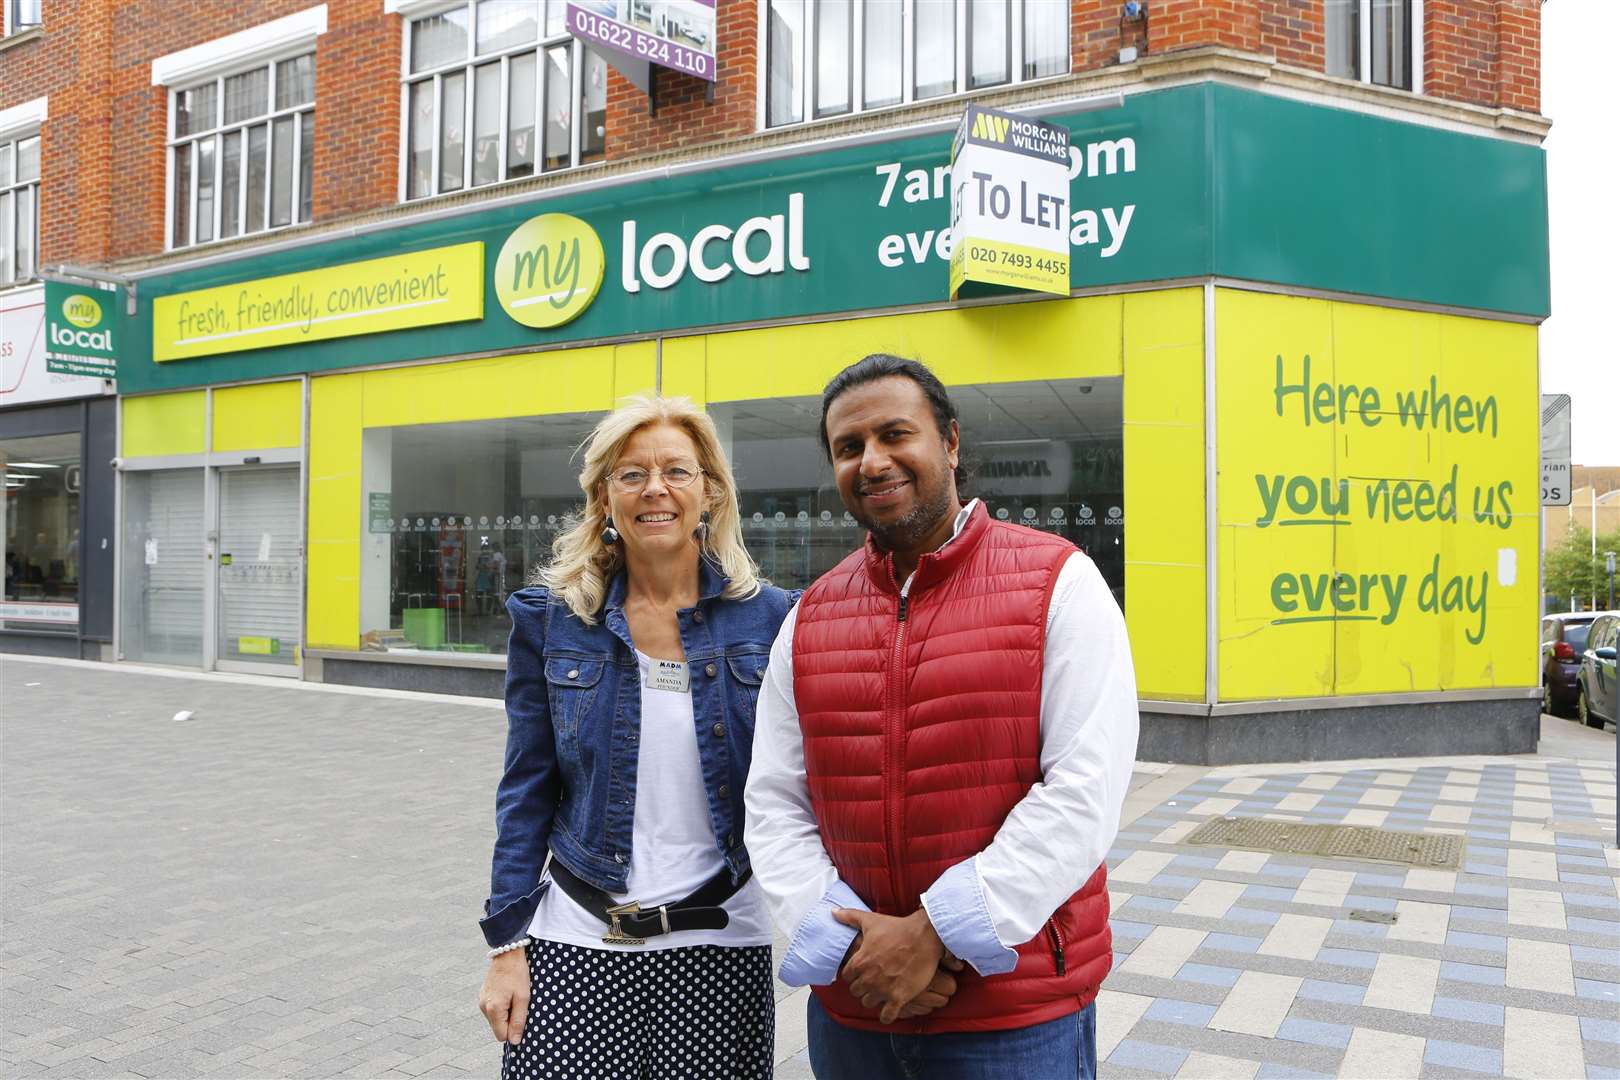 MADM charity had hoped to move into the old Morrison’s/My Local site on Week Street. Pictured are Amanda Sidwell & Manesh Mathew Picture: Andy Jones